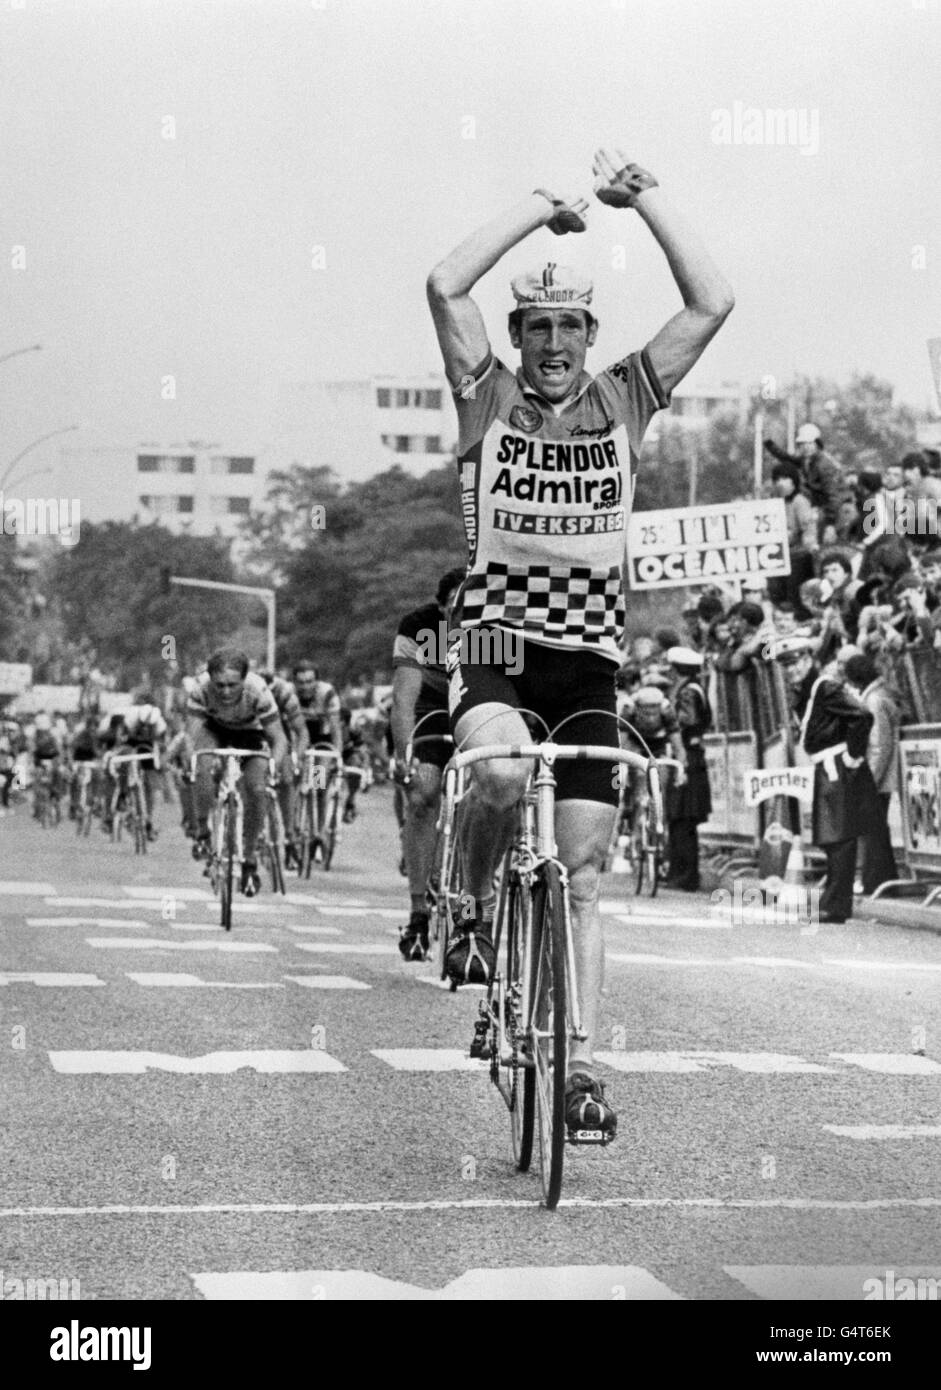 Sean Kelly of Eire crossing the line to win the penultimate stage of the 1980 Tour de France cycle classic from Auxerre to Fontenay-sous-Bois, a Paris suburb. The overall event was won by Dutchman Joop Zoetemelk (not pictured). Stock Photo